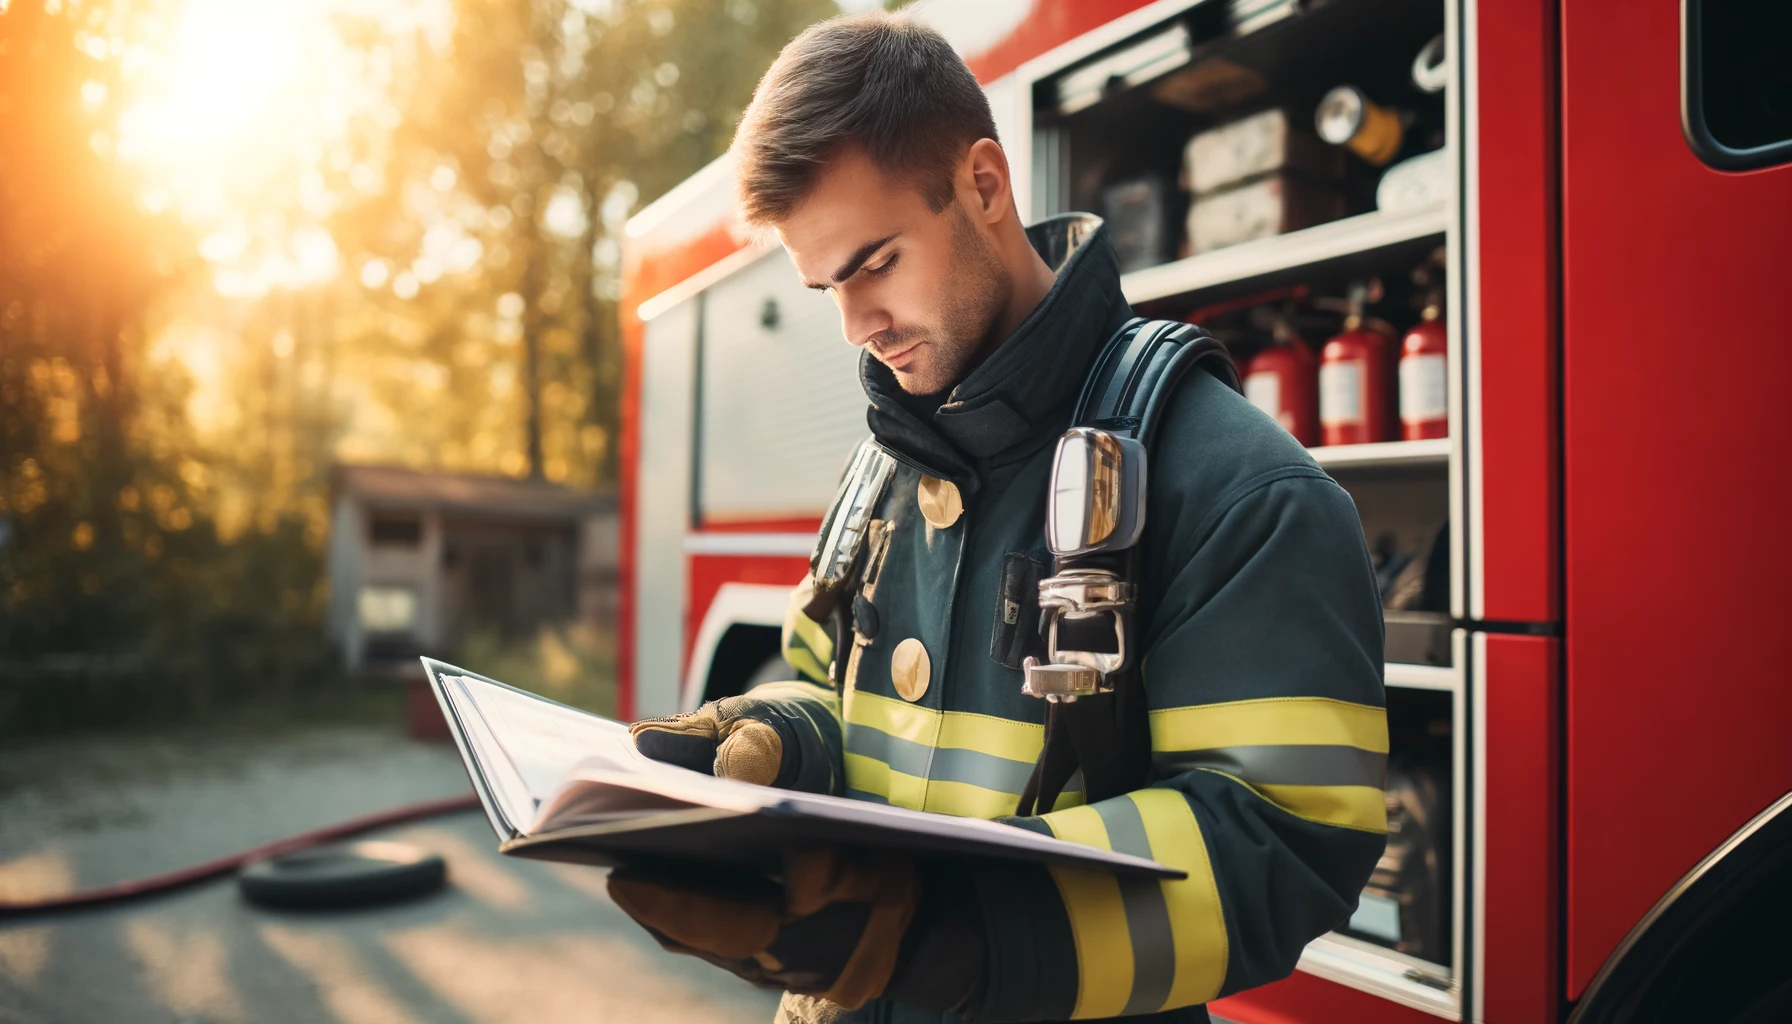 A firefighter in full gear examining a book or binder, standing near a fire truck under daylight. The firefighter, a Caucasian male, is focused intently on the book, which is open in his hands. The background features a partially visible fire truck and blurred trees.